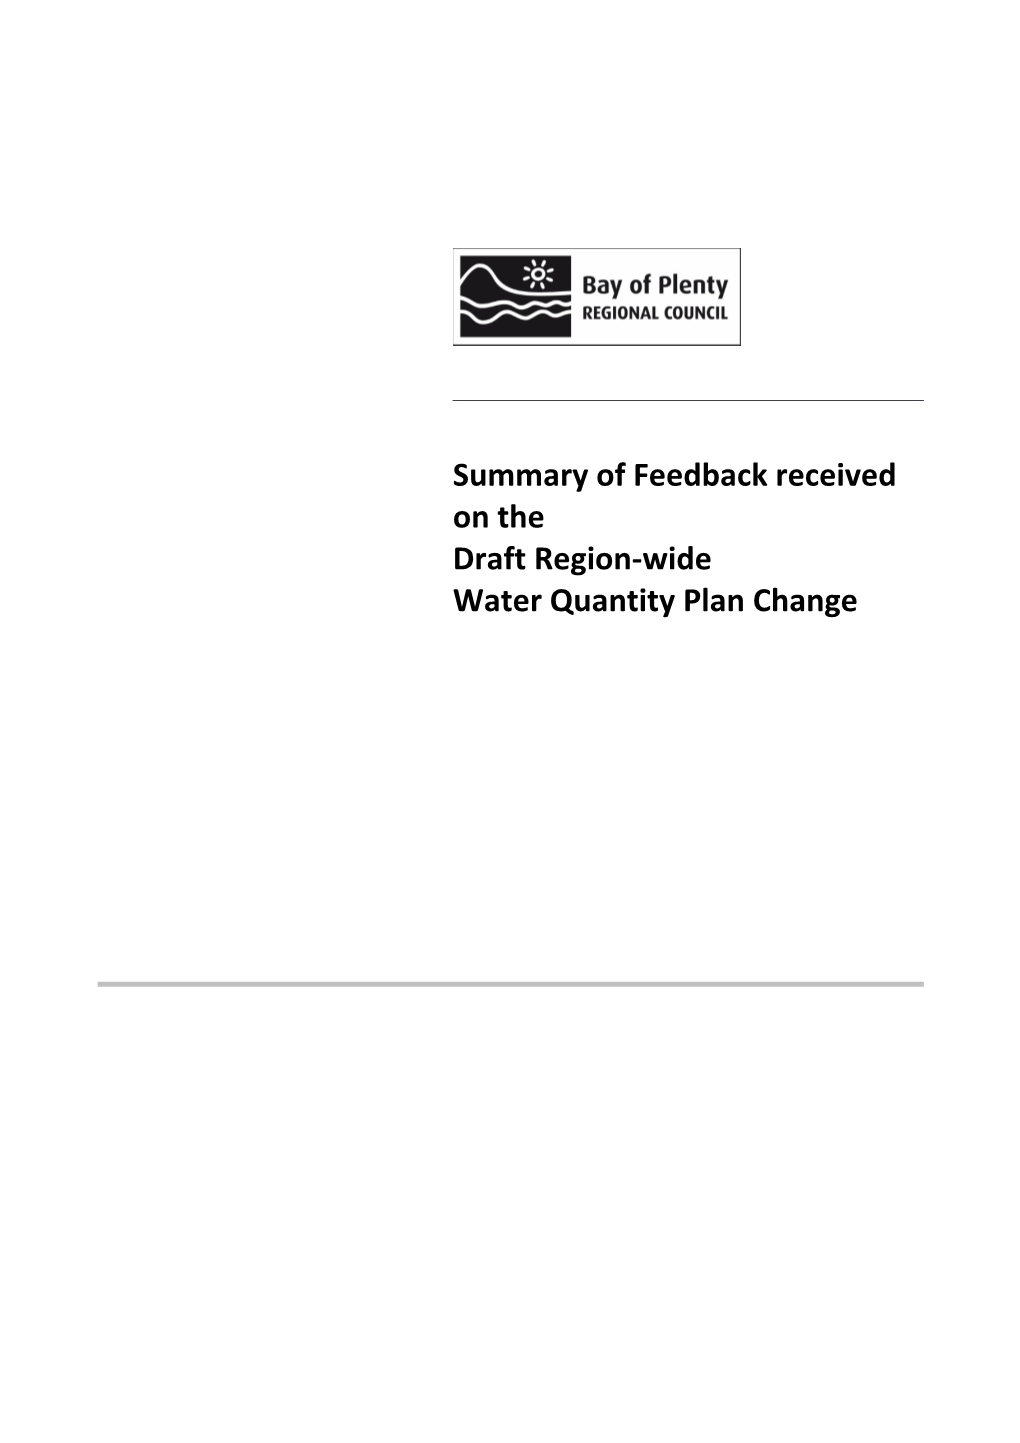 Summary of Feedback Received on the Draft Region-Wide Water Quantity Plan Change